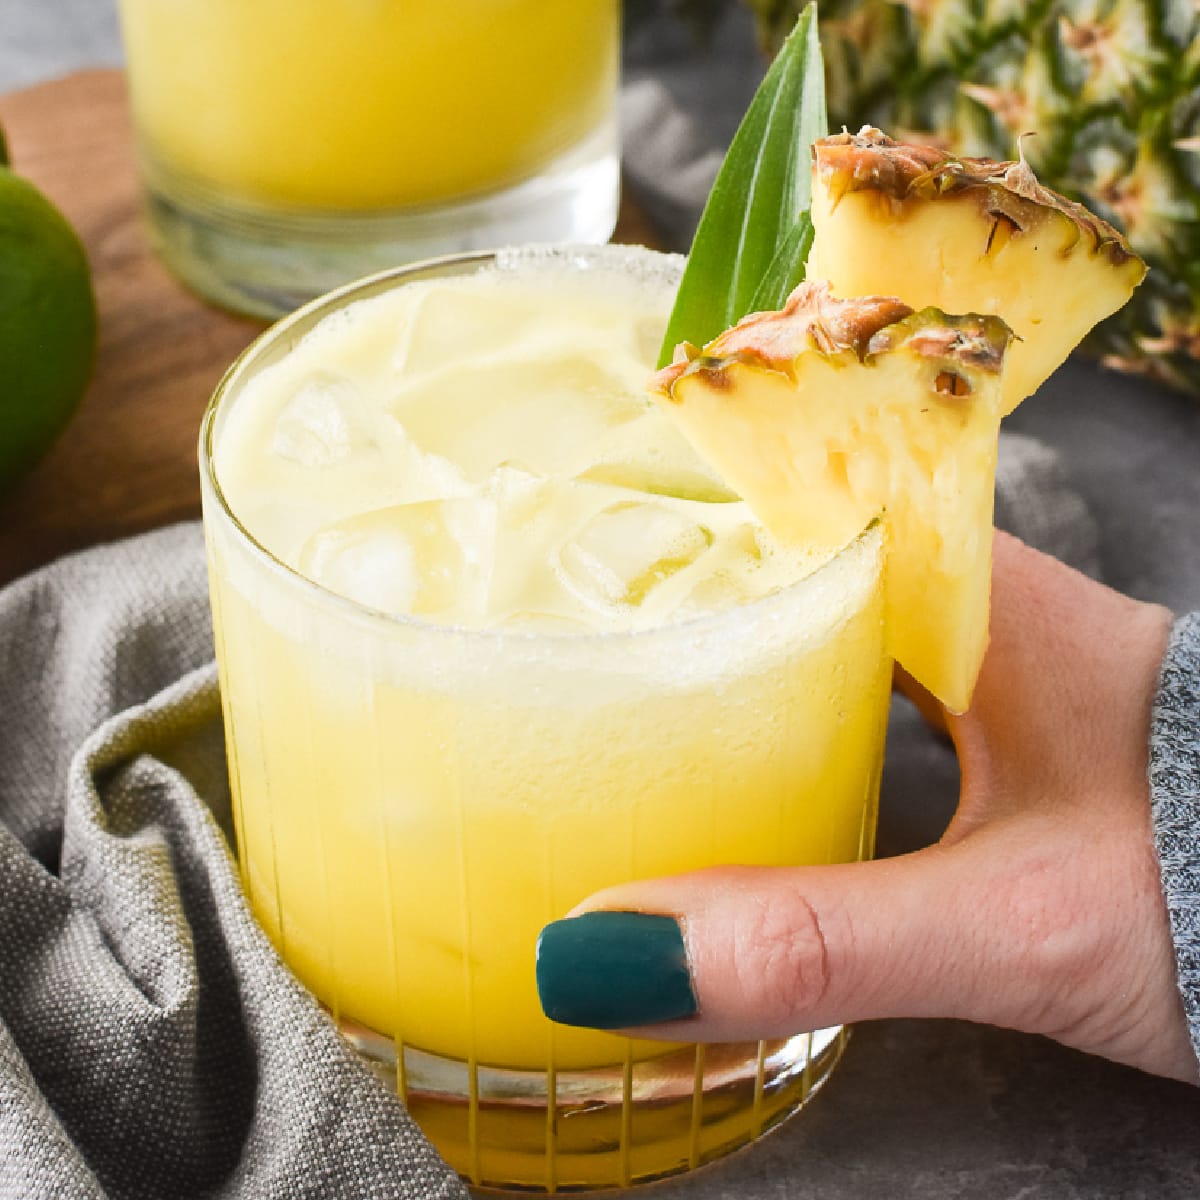 This fresh pineapple margarita with mezcal is sweet, tropical, a little smoky and goes perfectly with all of your favorite Mexican-inspired food! #21dayfix #ww #glutenfree #dairyfree #vegan #summer #cincodemayo #skinnycocktail #mexican